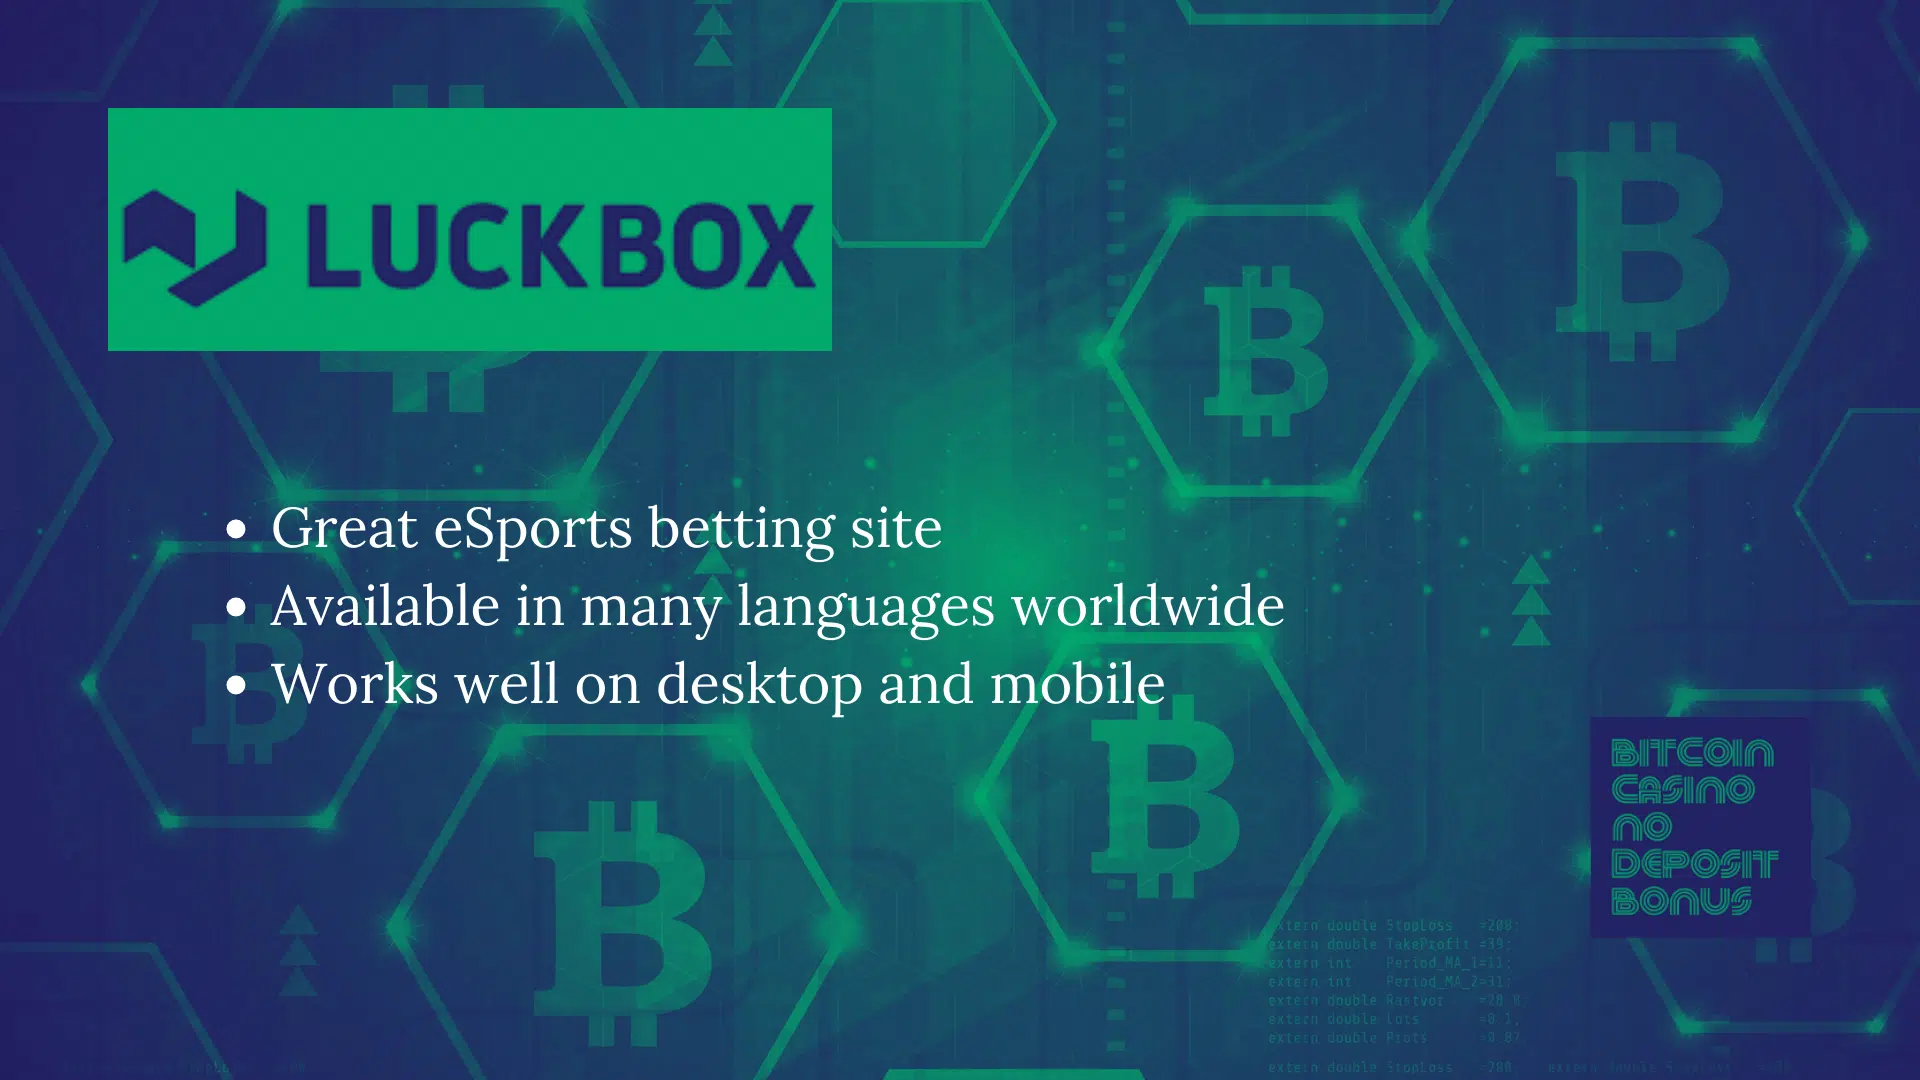 You are currently viewing LuckBox Free Bonus Codes – Luckbox.com Coupons December 2022